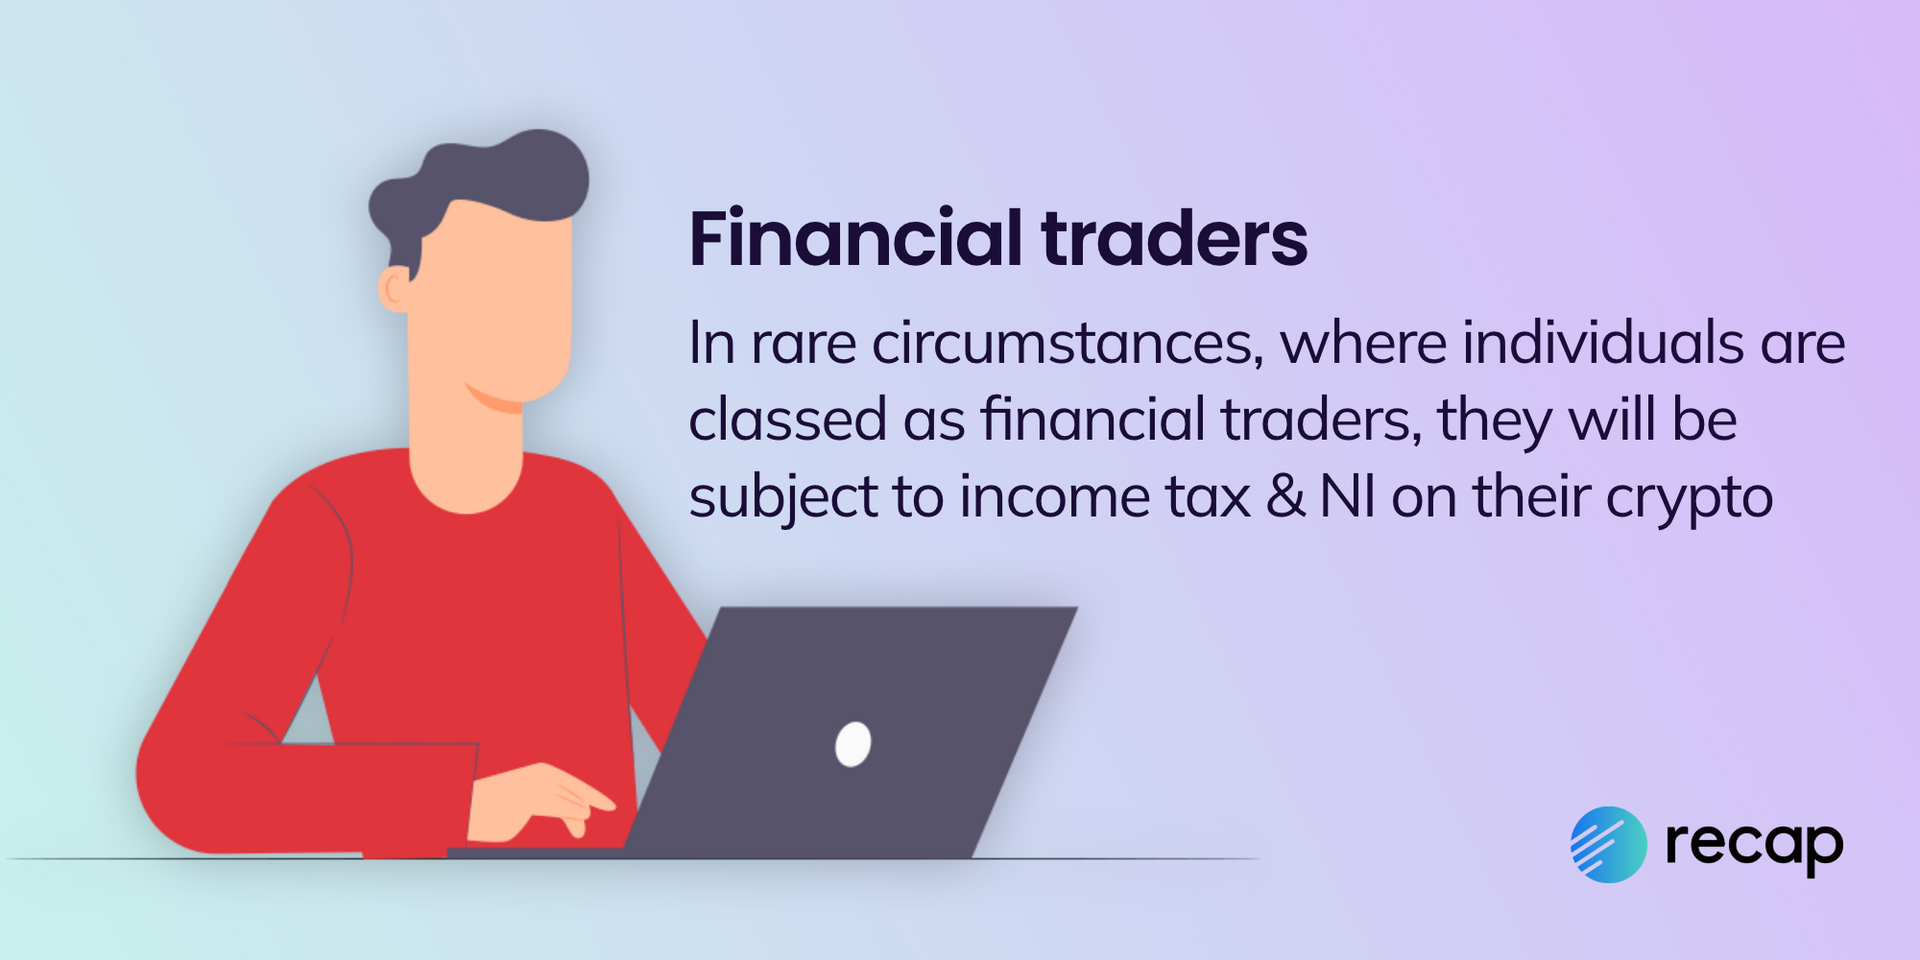 A graphic stating that "in rare circumstances, where individuals are classed as financial traders, they will be subject to income tax and national insurance on their crypto